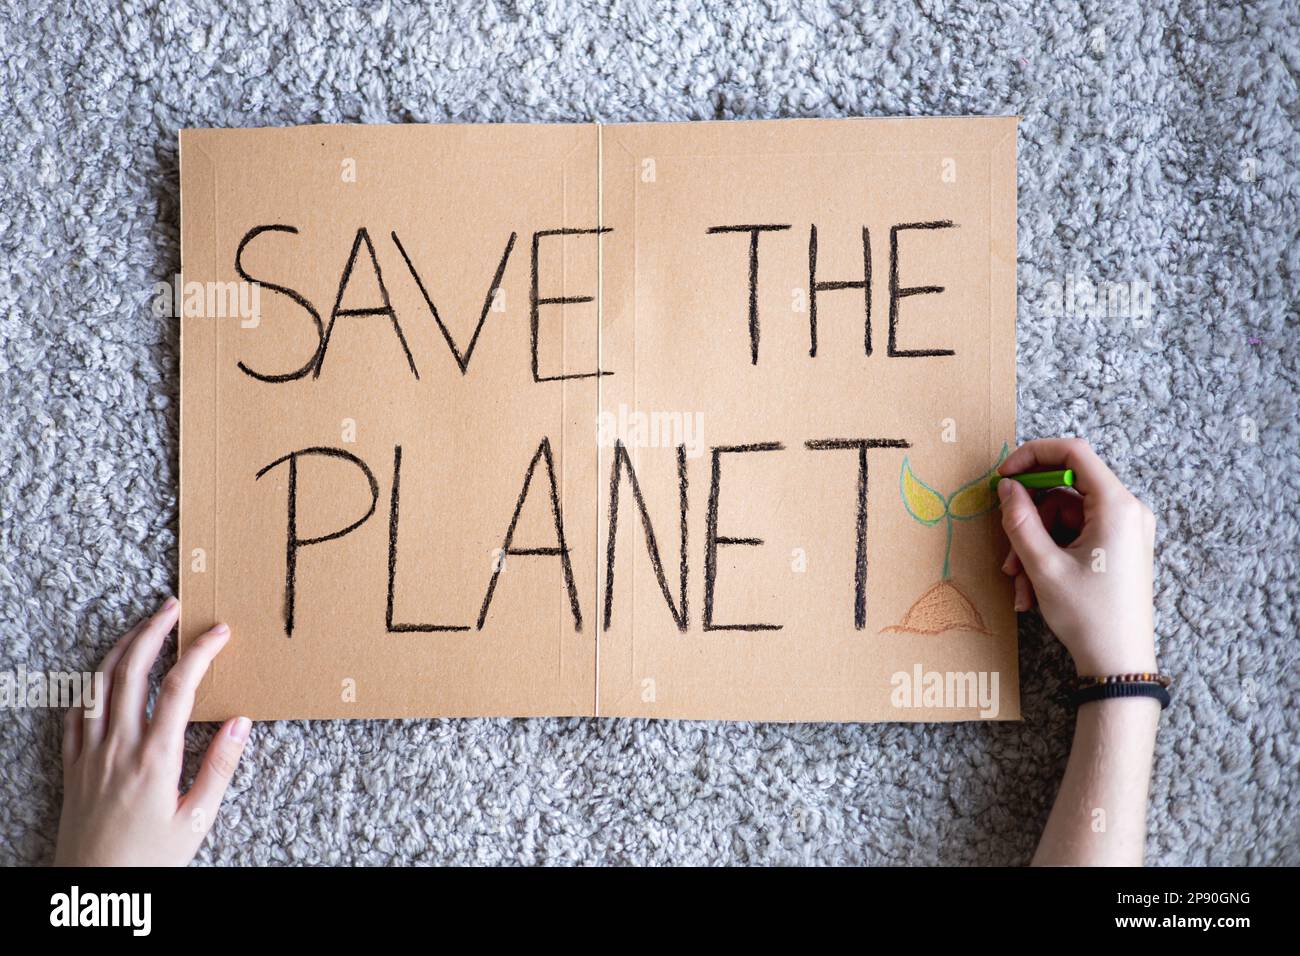 Activist writing 'SAVE THE PLANET' poster for manifestation against global warming and earth pollution. Cardboard banner to protest climate change. Stock Photo